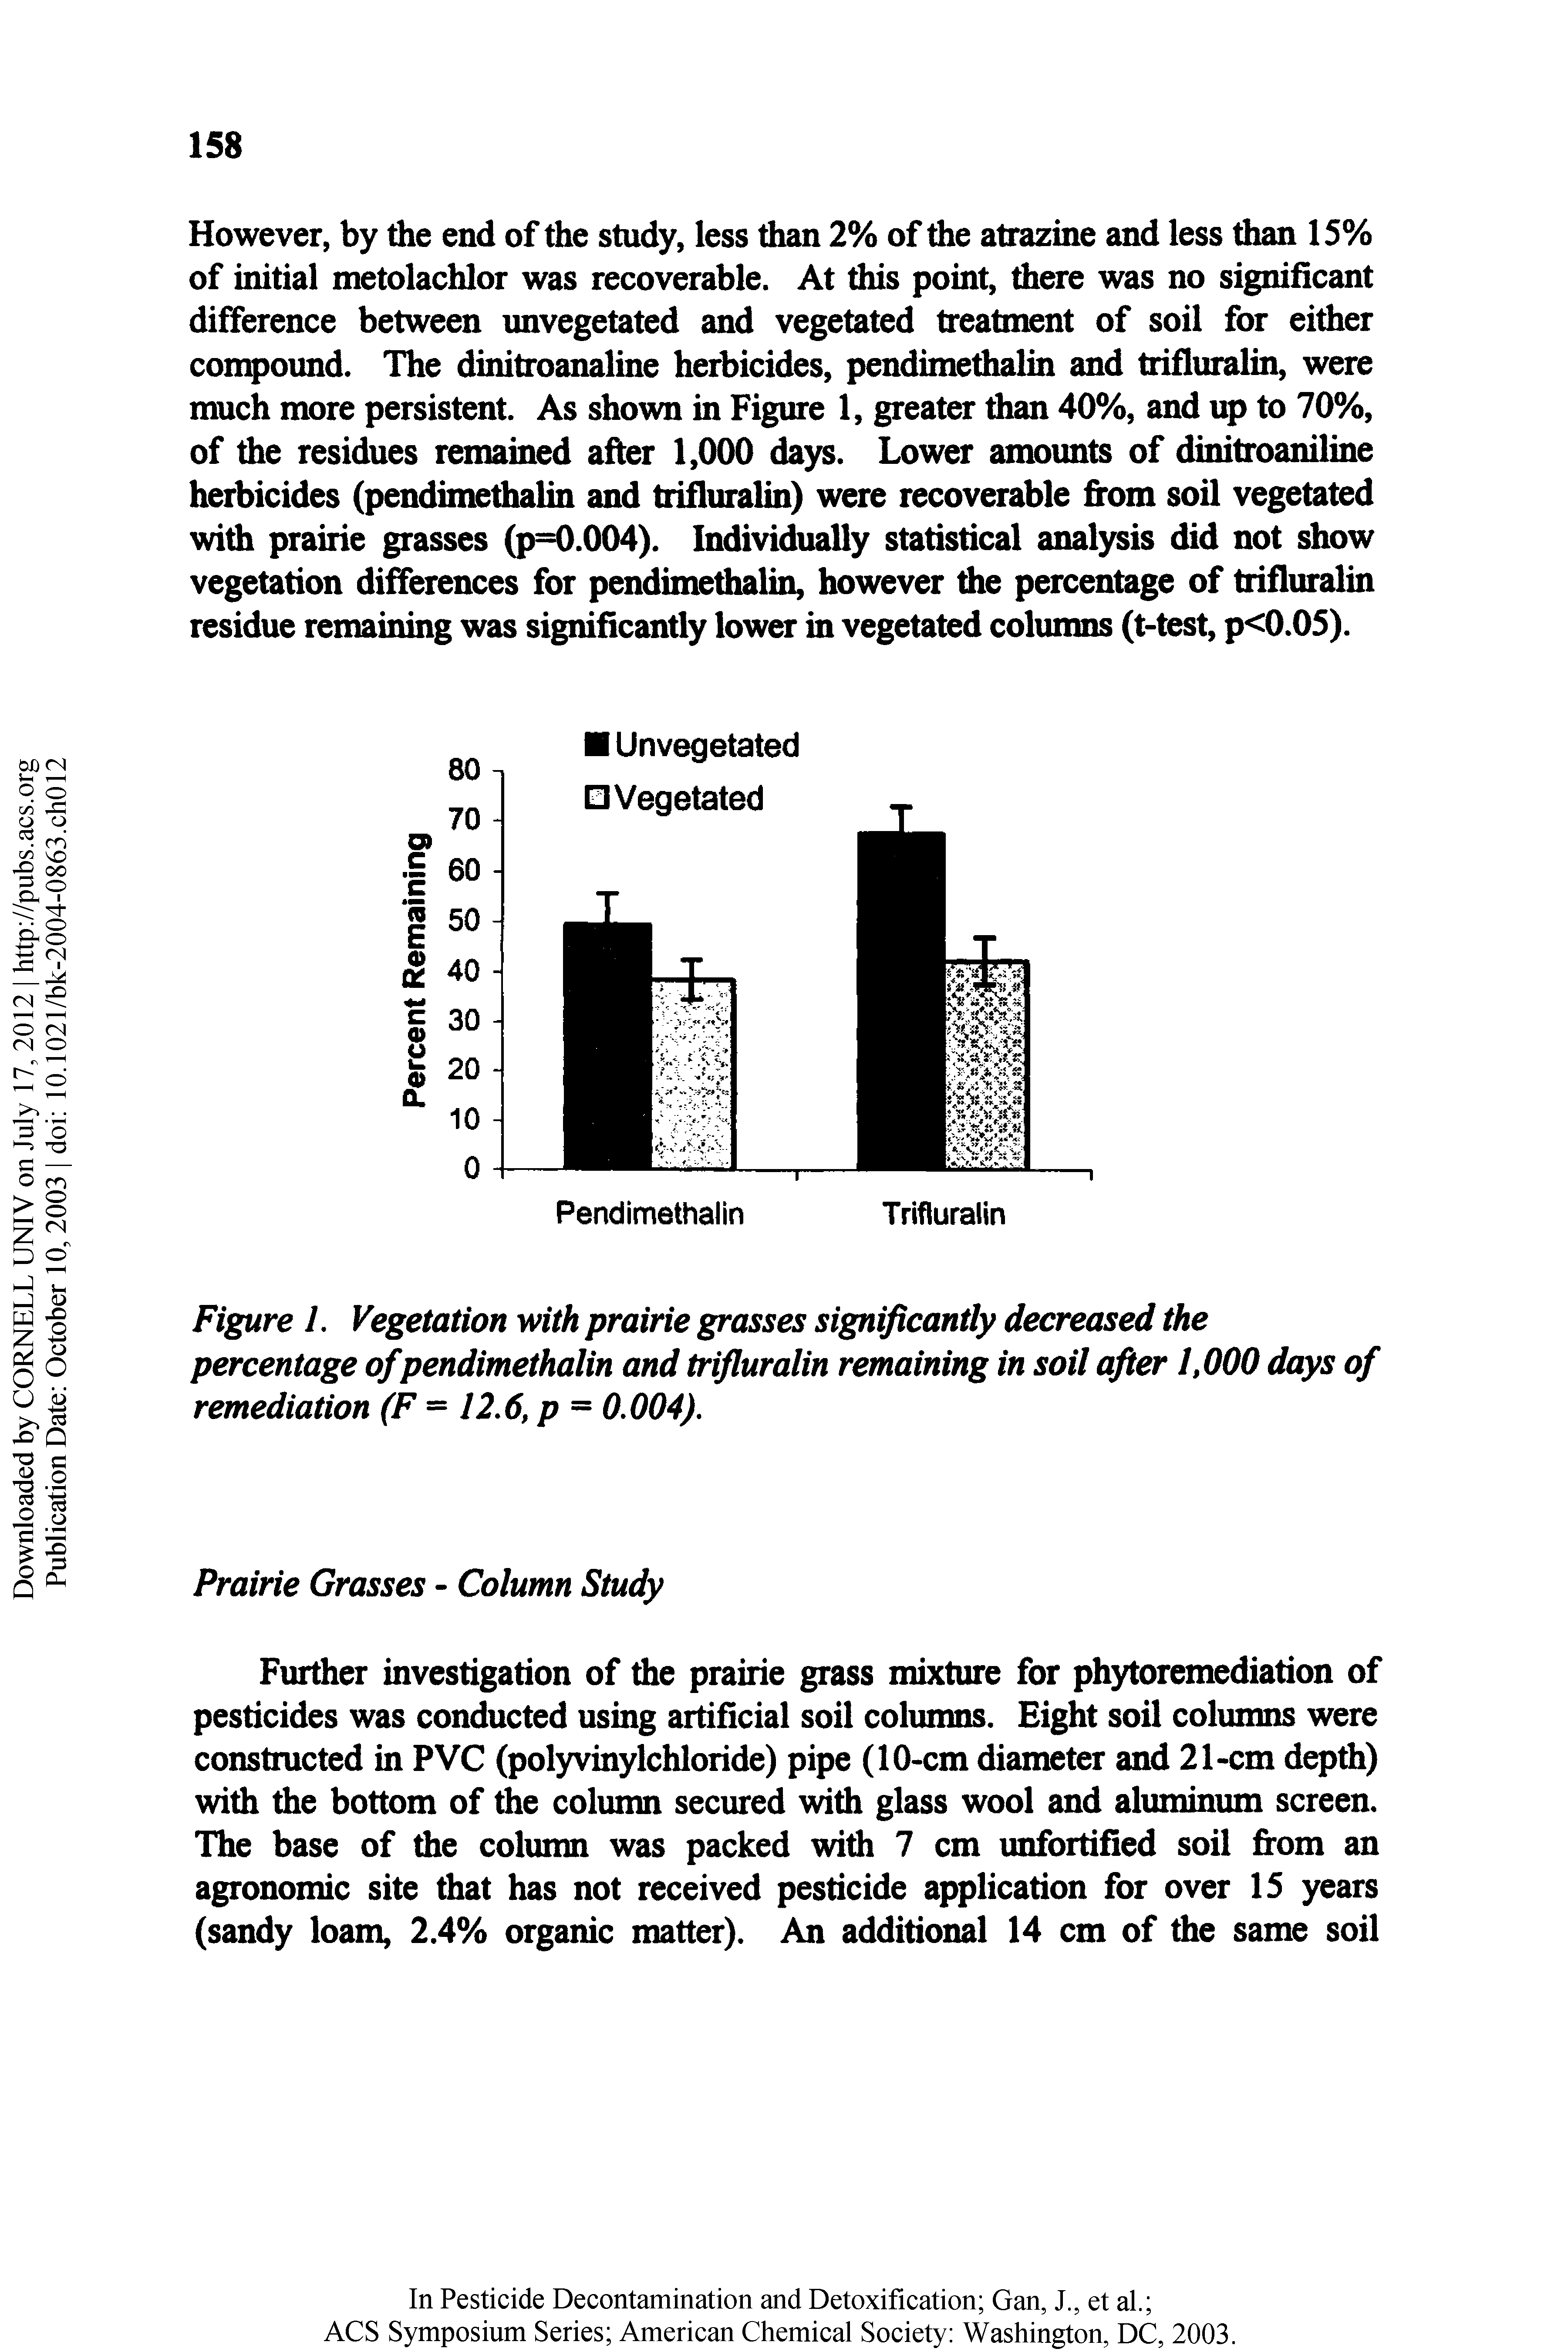 Figure 1. Vegetation with prairie grasses significantly decreased the percentage of pendimethalin and trifluralin remaining in soil after 1,000 days of remediation (F = 12.6, p = 0.004).